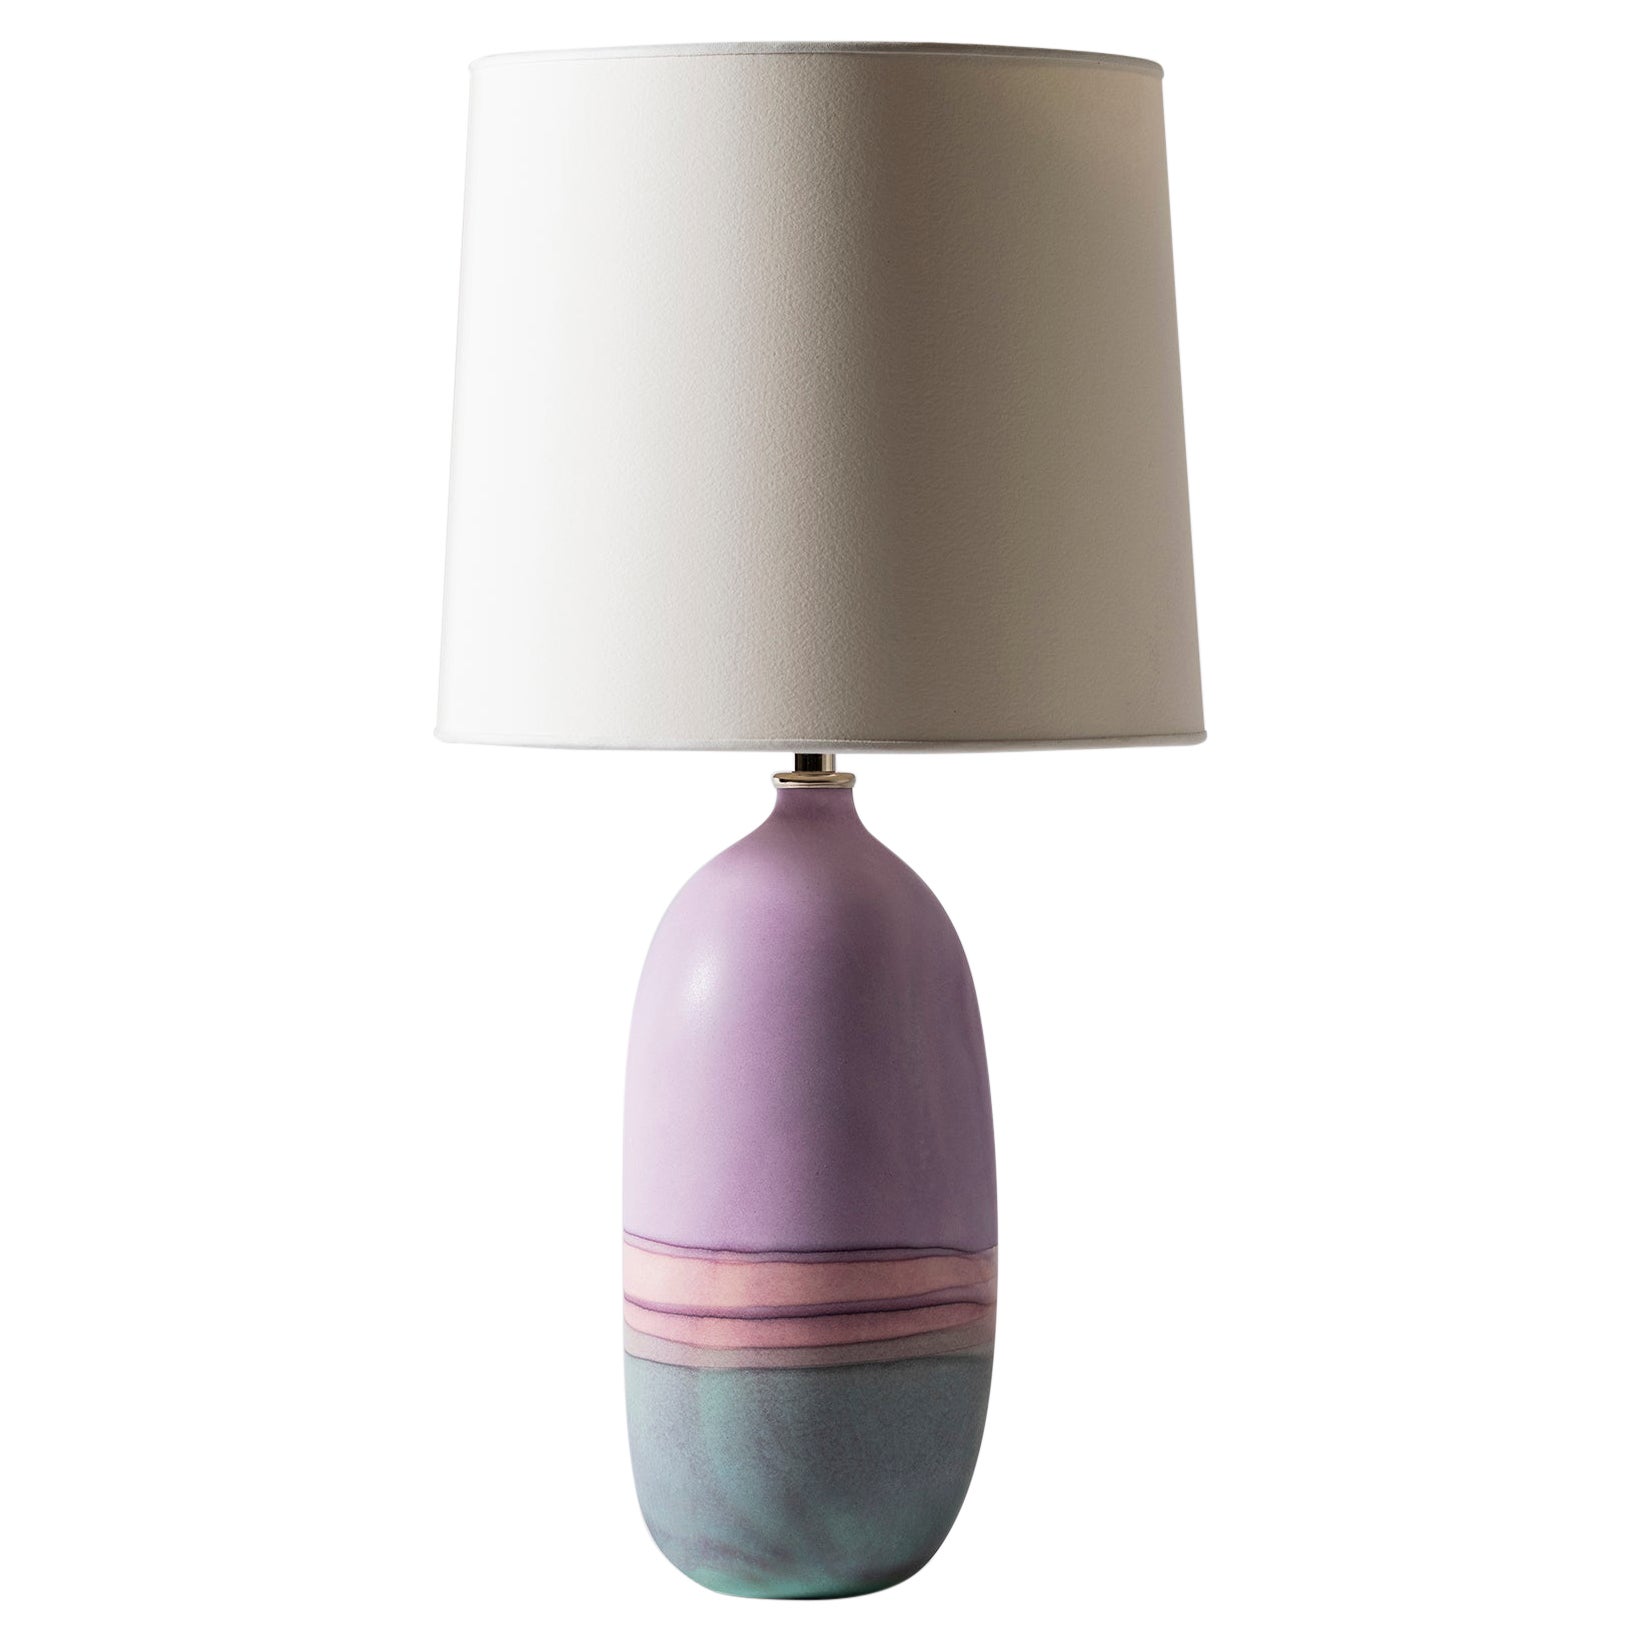 Contemporary Oblong Mercury Table Lamp in Lilac Ombre by Elyse Graham